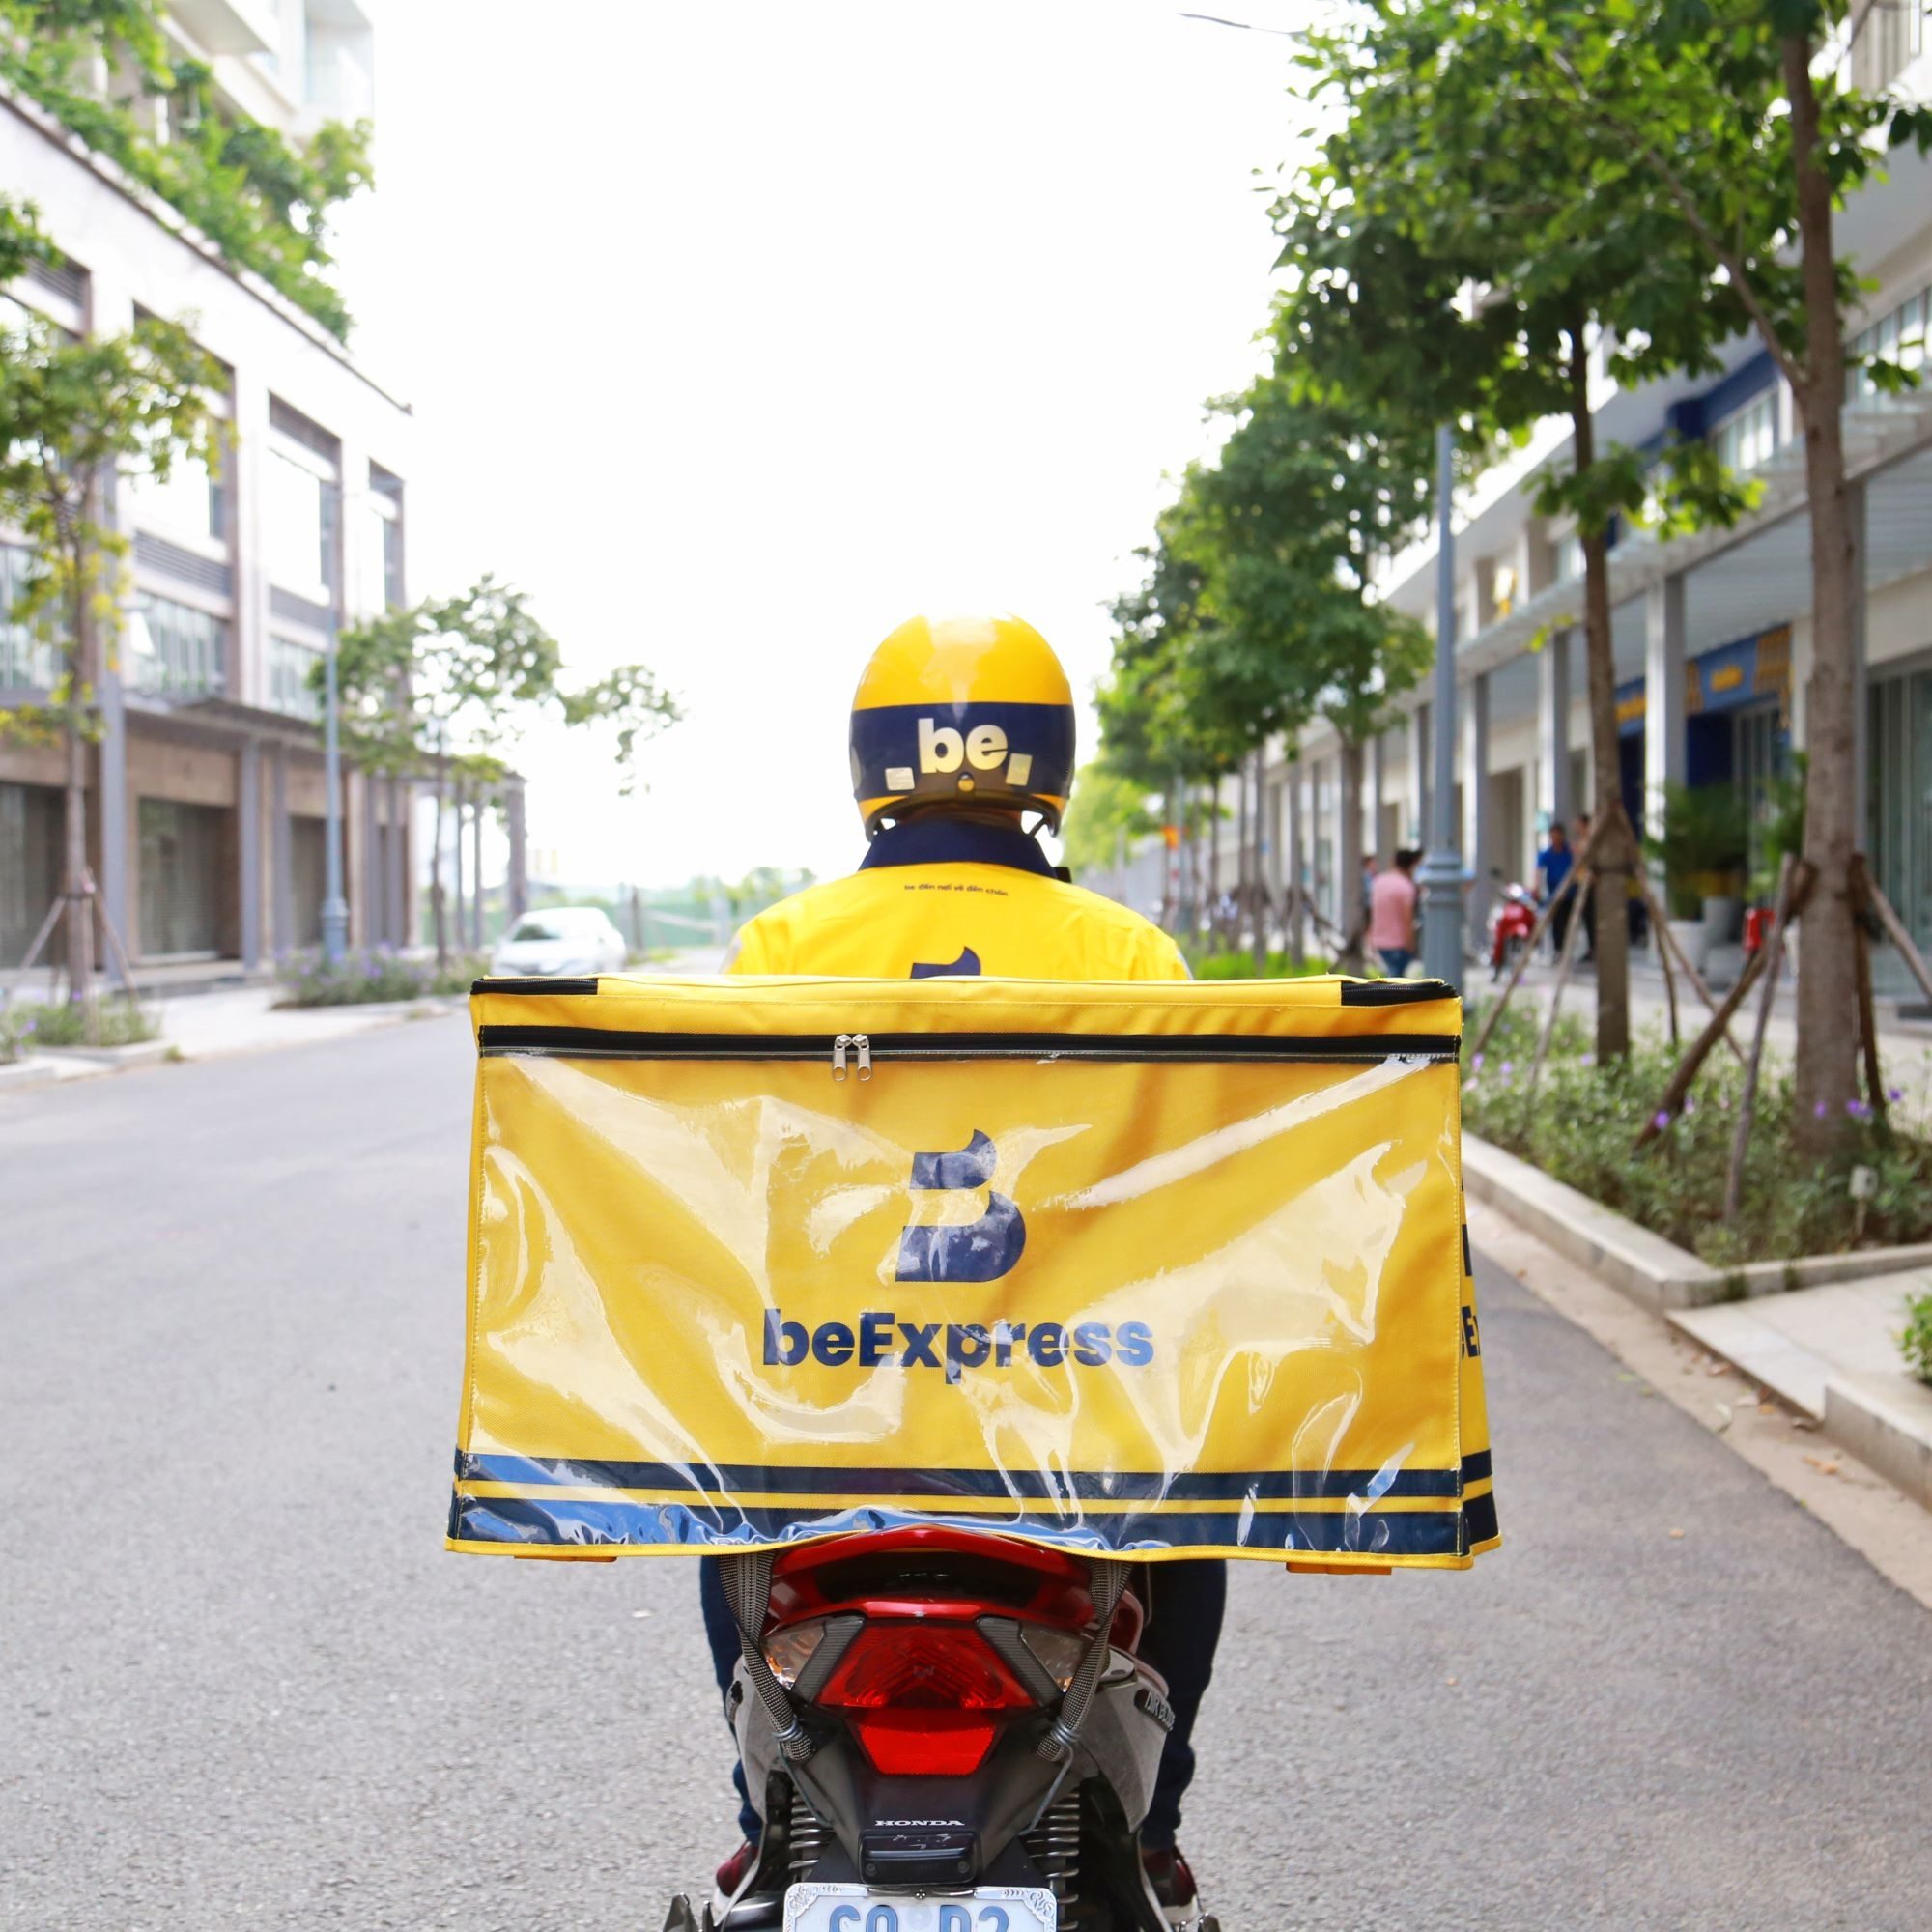 Vietnam's ride-hailing firm Be Group launches delivery services to take on Grab, Go-Viet